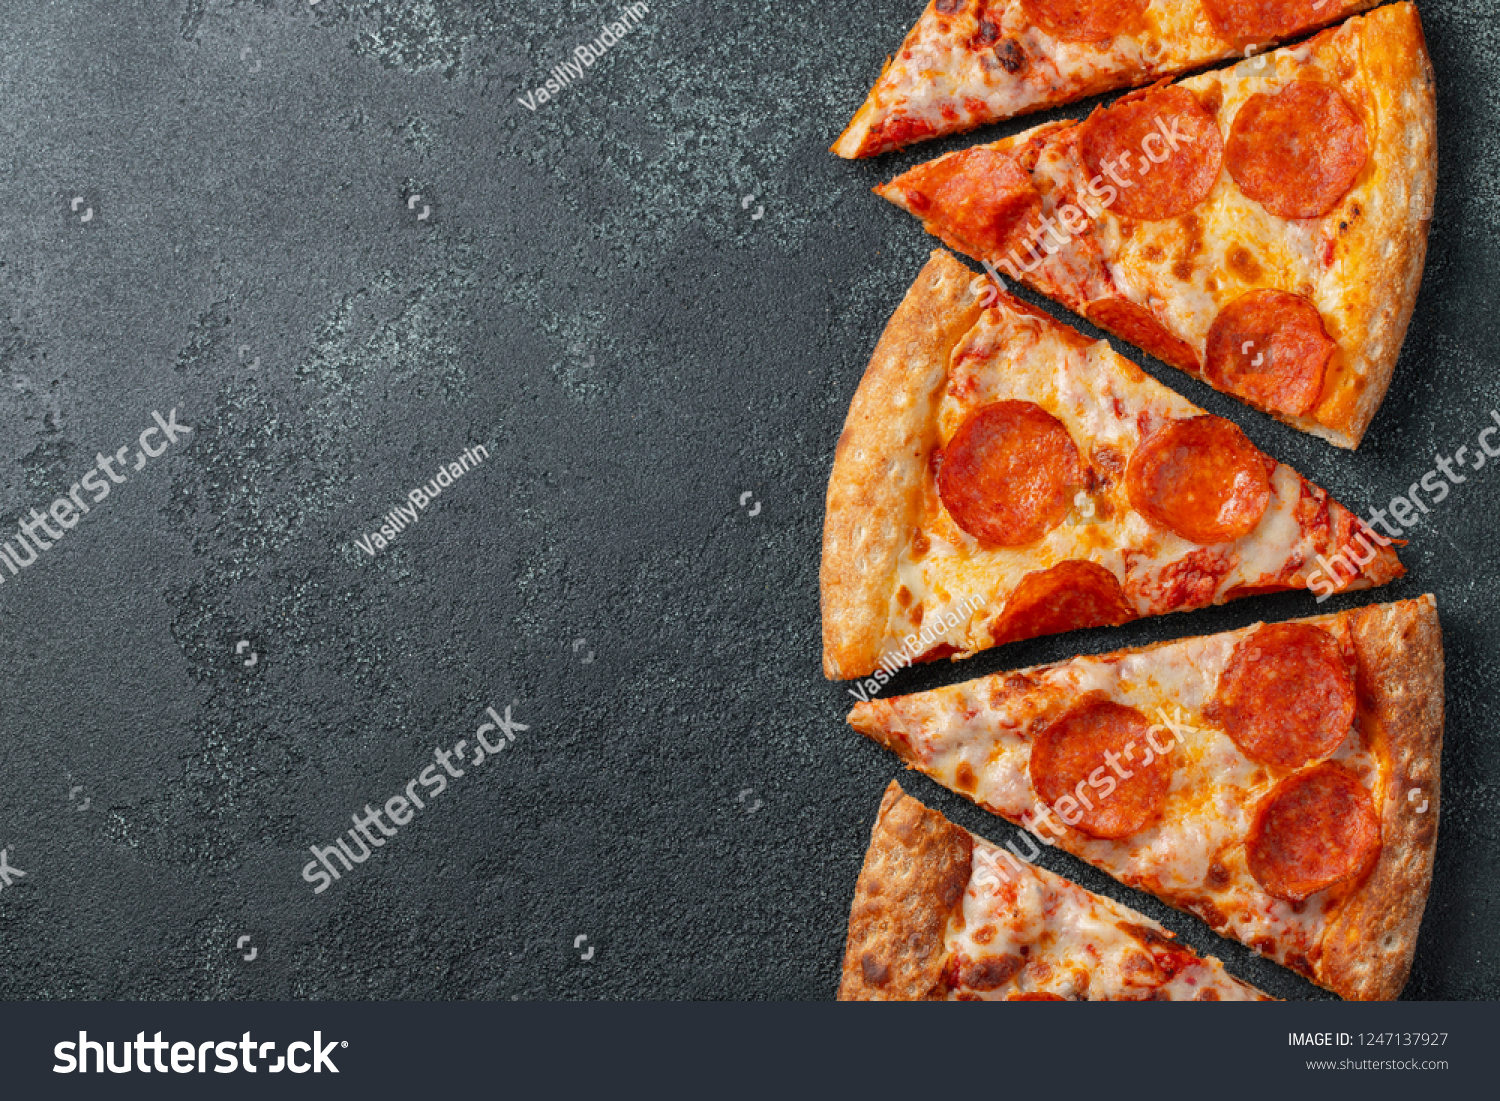 Cut into slices delicious fresh pizza with sausage pepperoni and cheese on a dark background. Top view with copy space for text. Pizza on the black concrete table. flat lay #1247137927